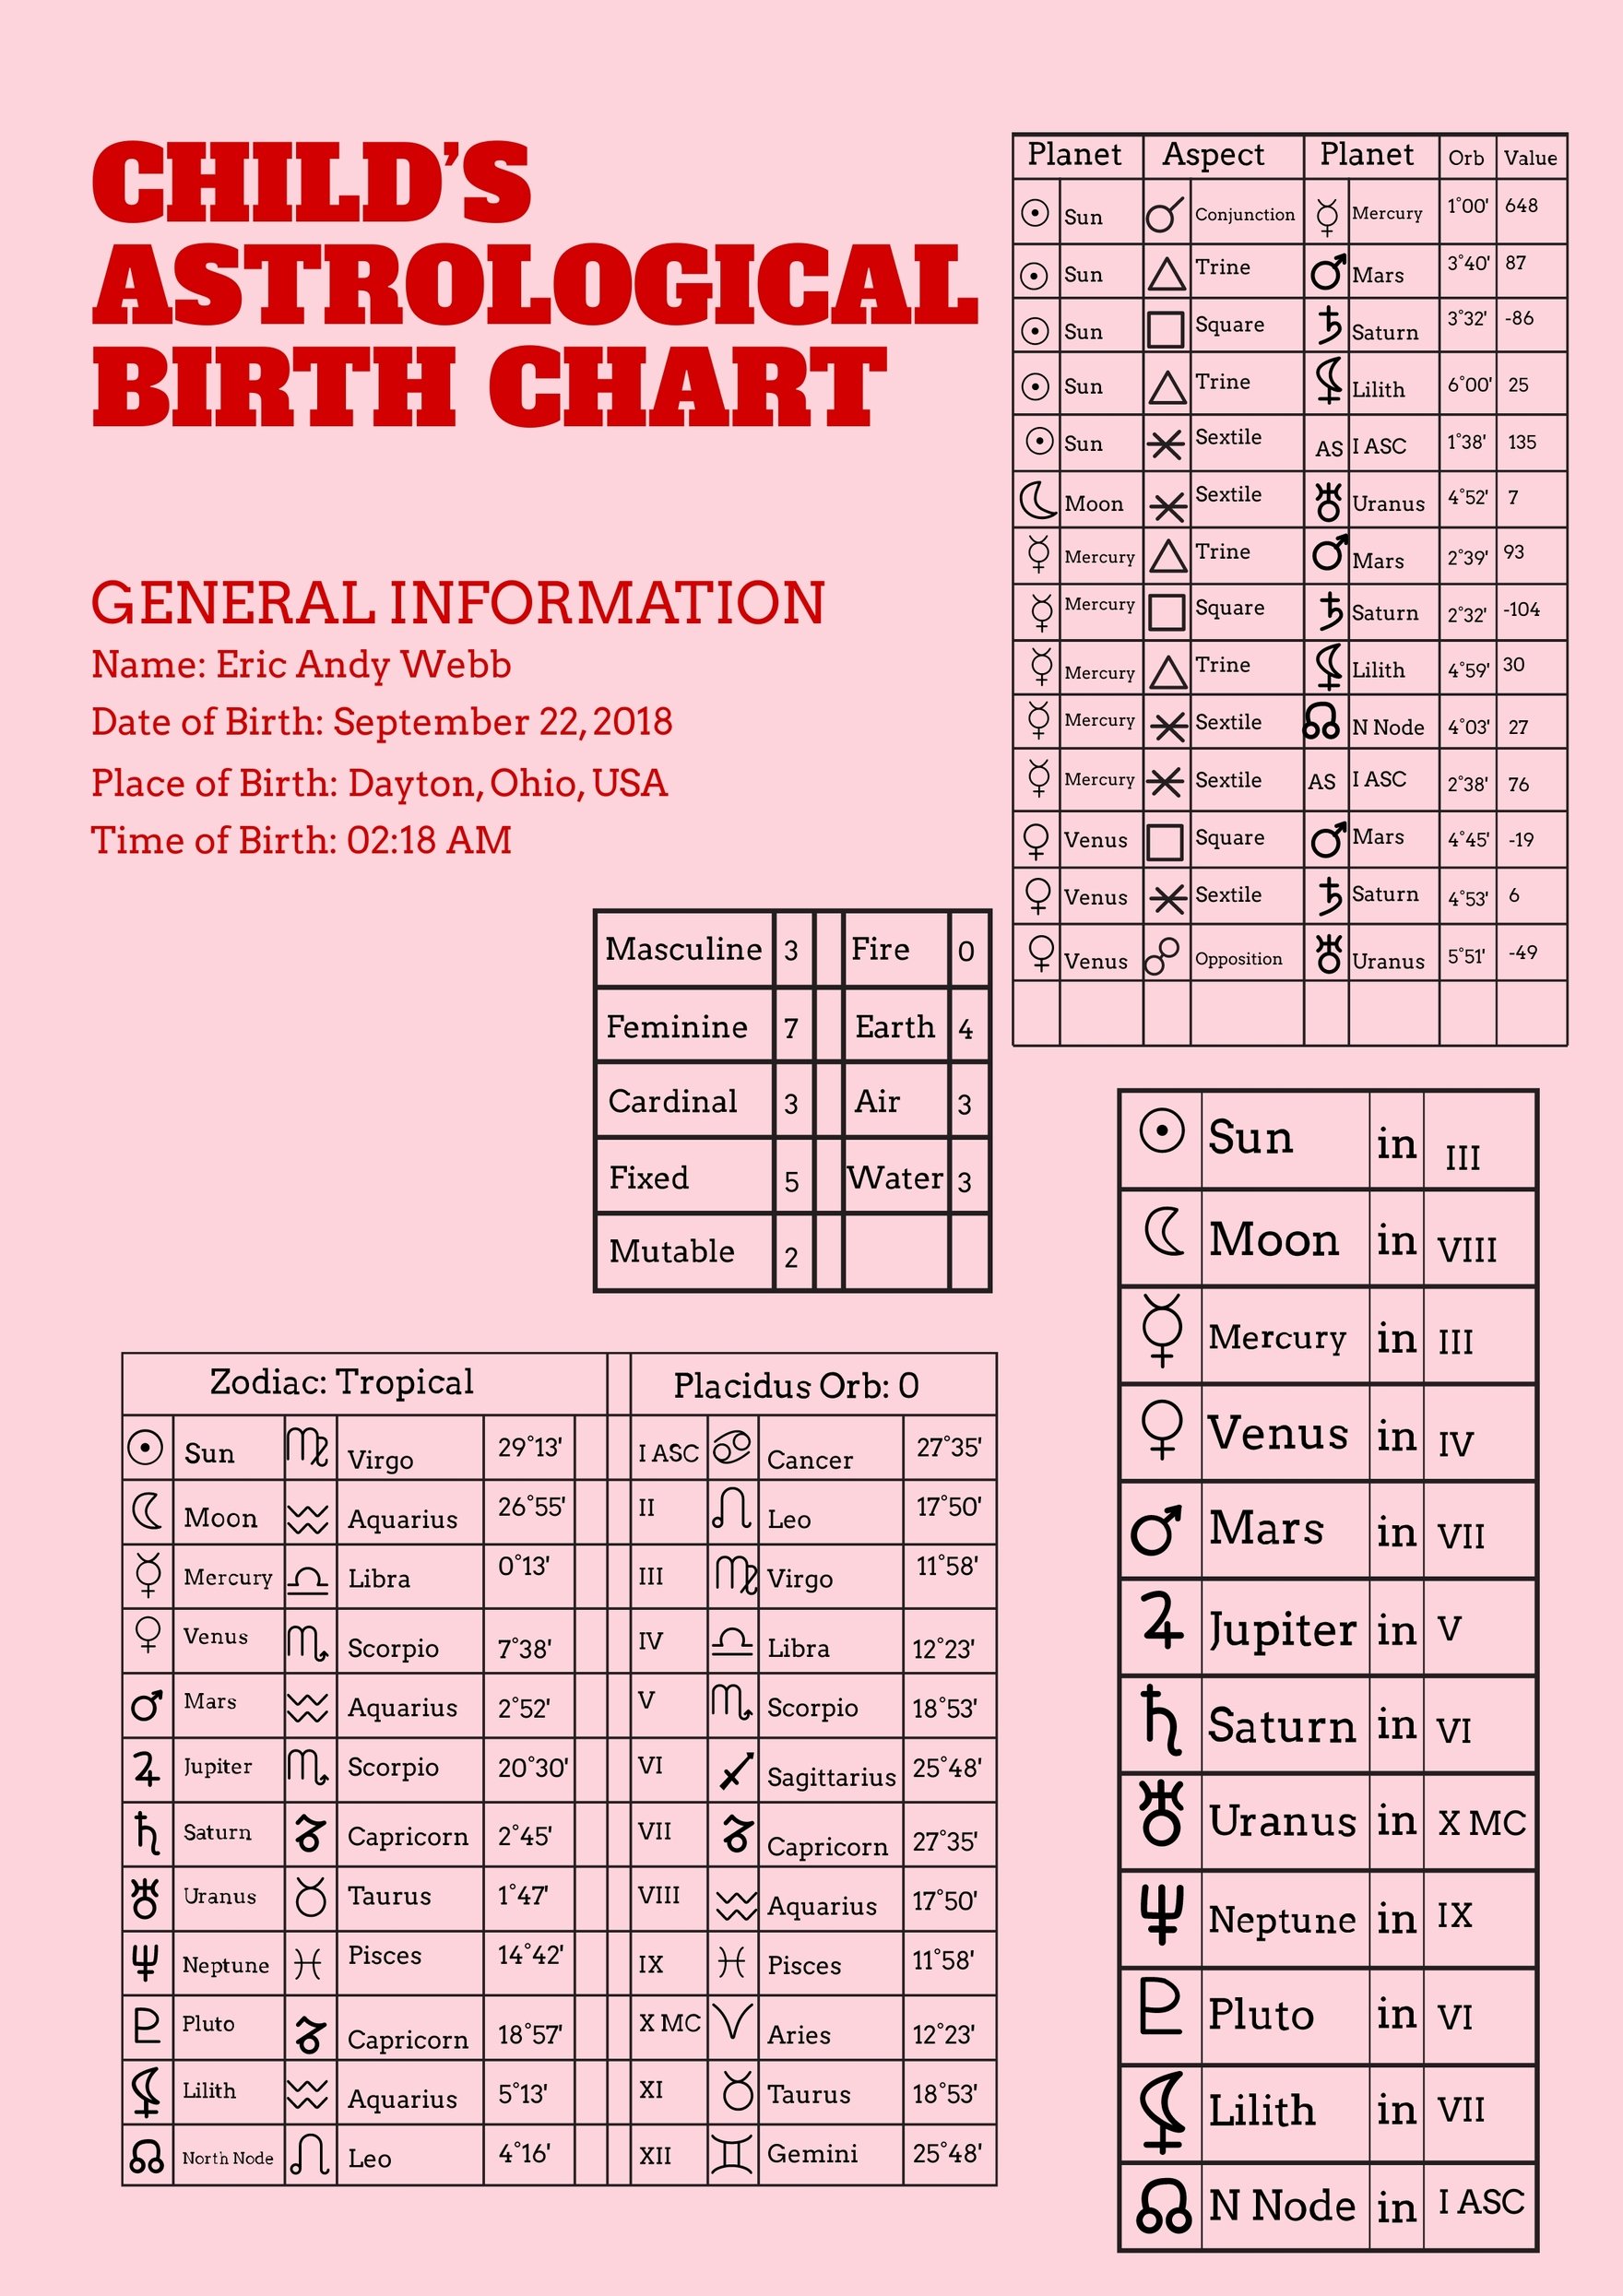 Child's Astrological Birth Chart Template in PDF, Illustrator